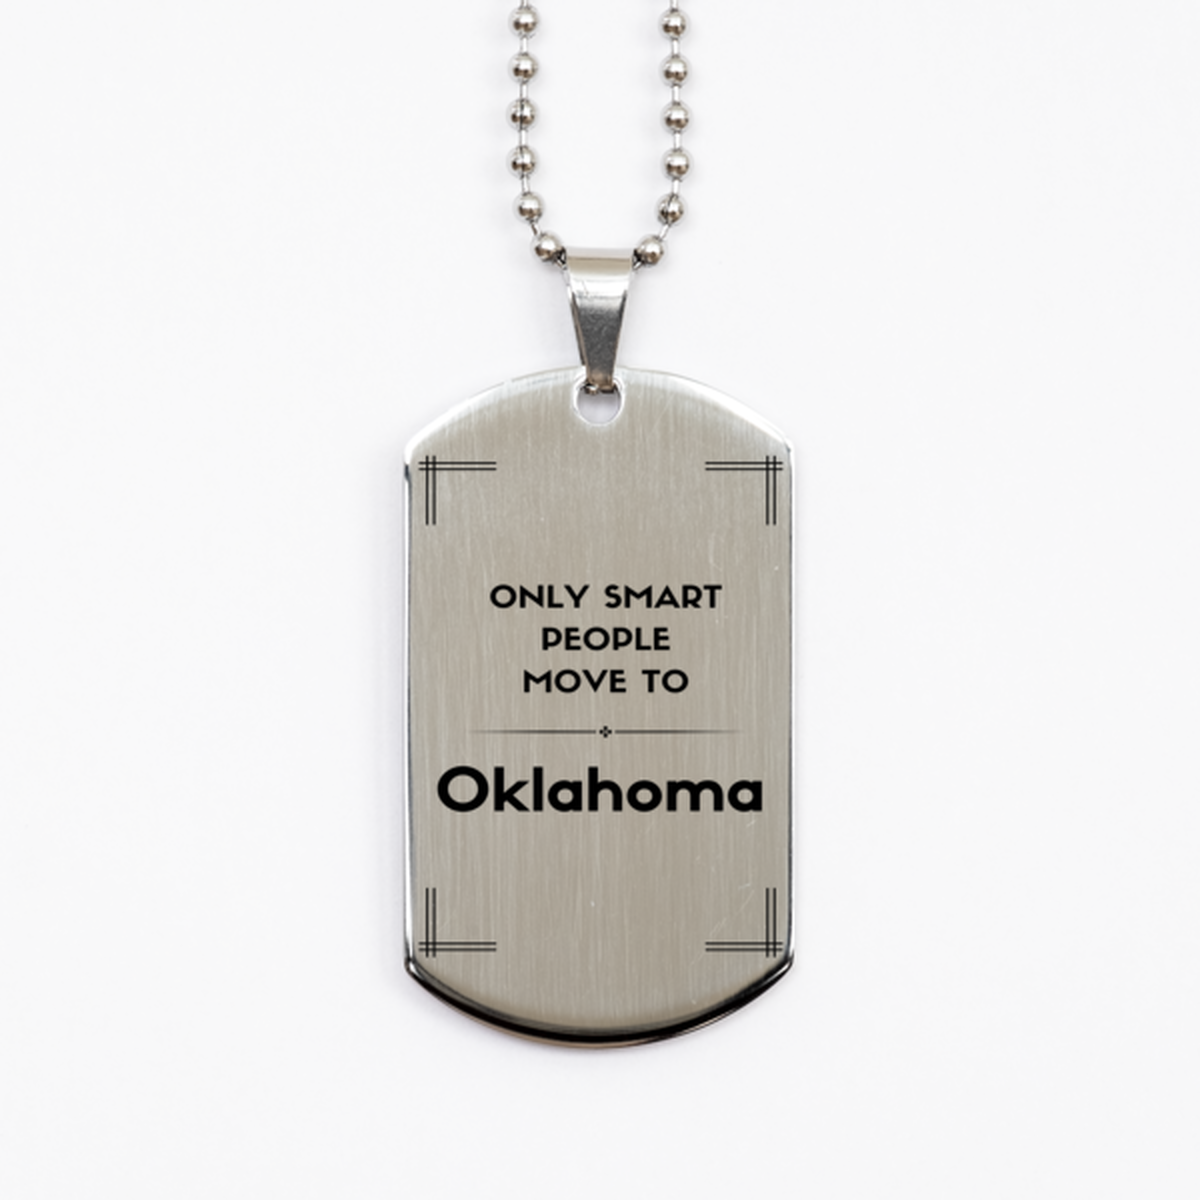 Only smart people move to Oklahoma Silver Dog Tag, Gag Gifts For Oklahoma, Move to Oklahoma Gifts for Friends Coworker Funny Saying Quote